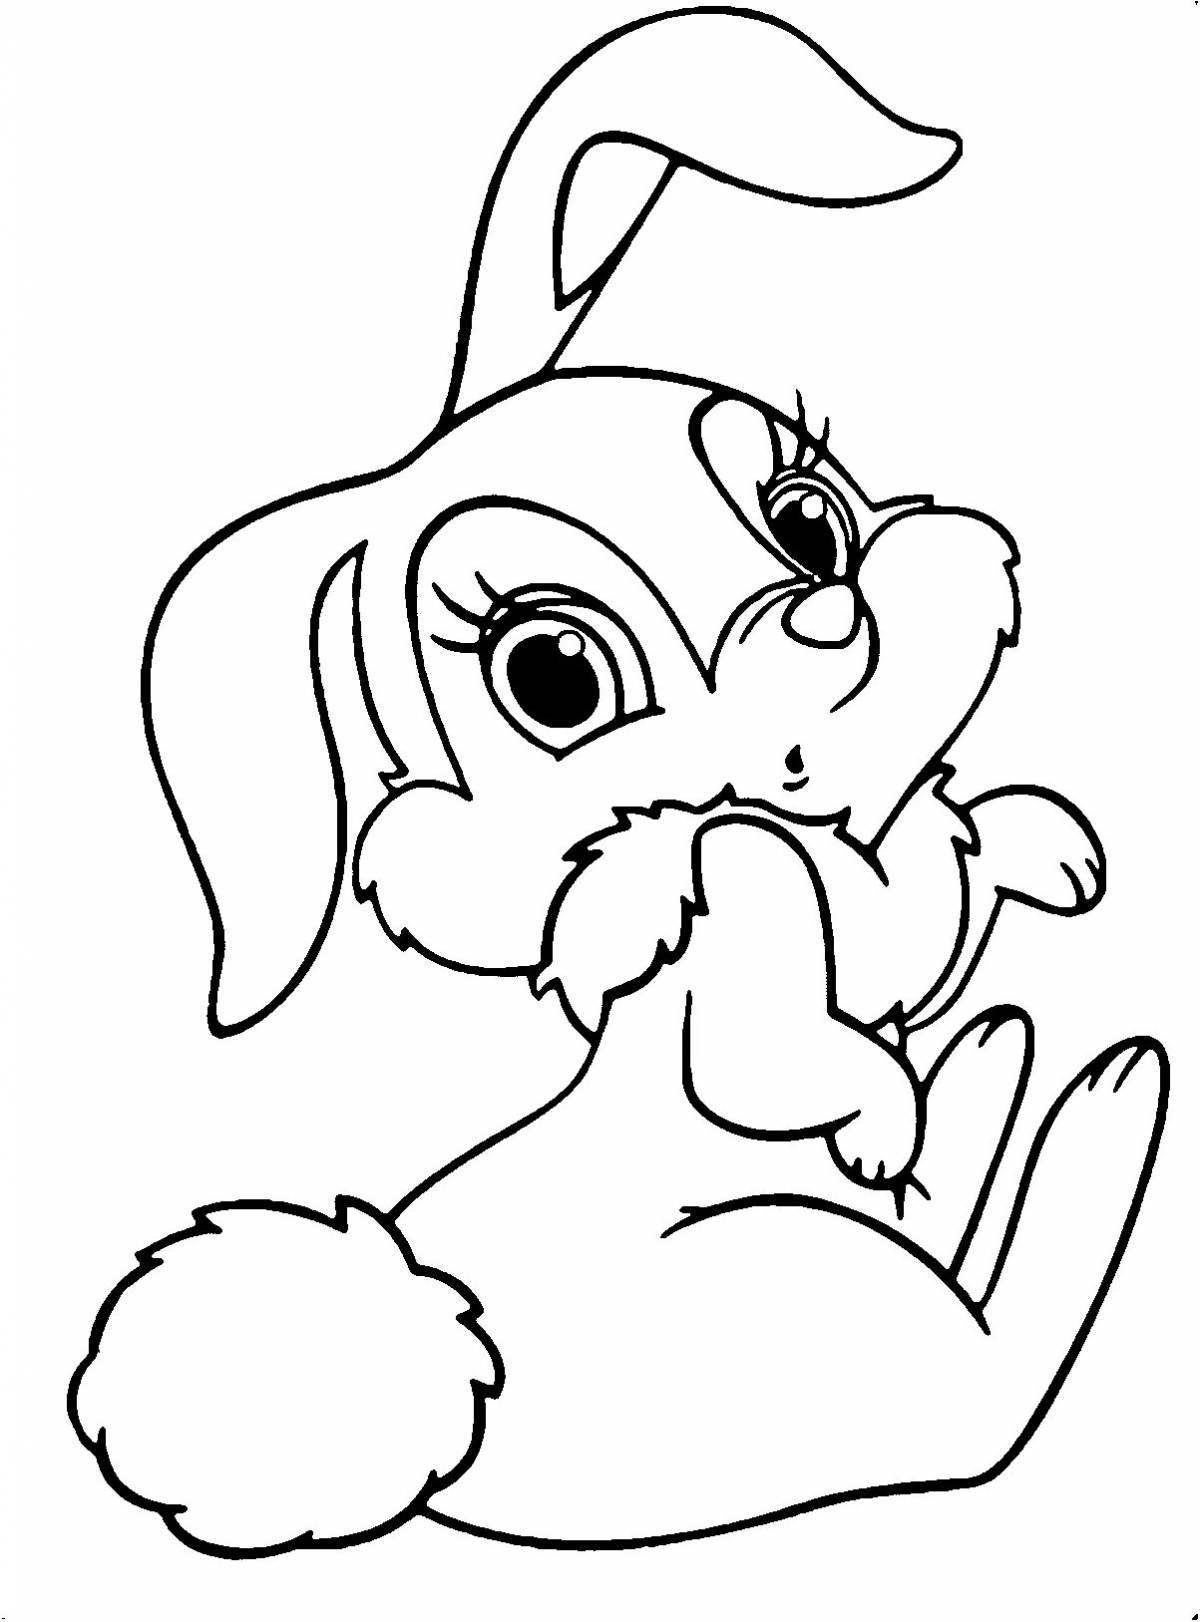 Sweet bunny coloring book with a bow